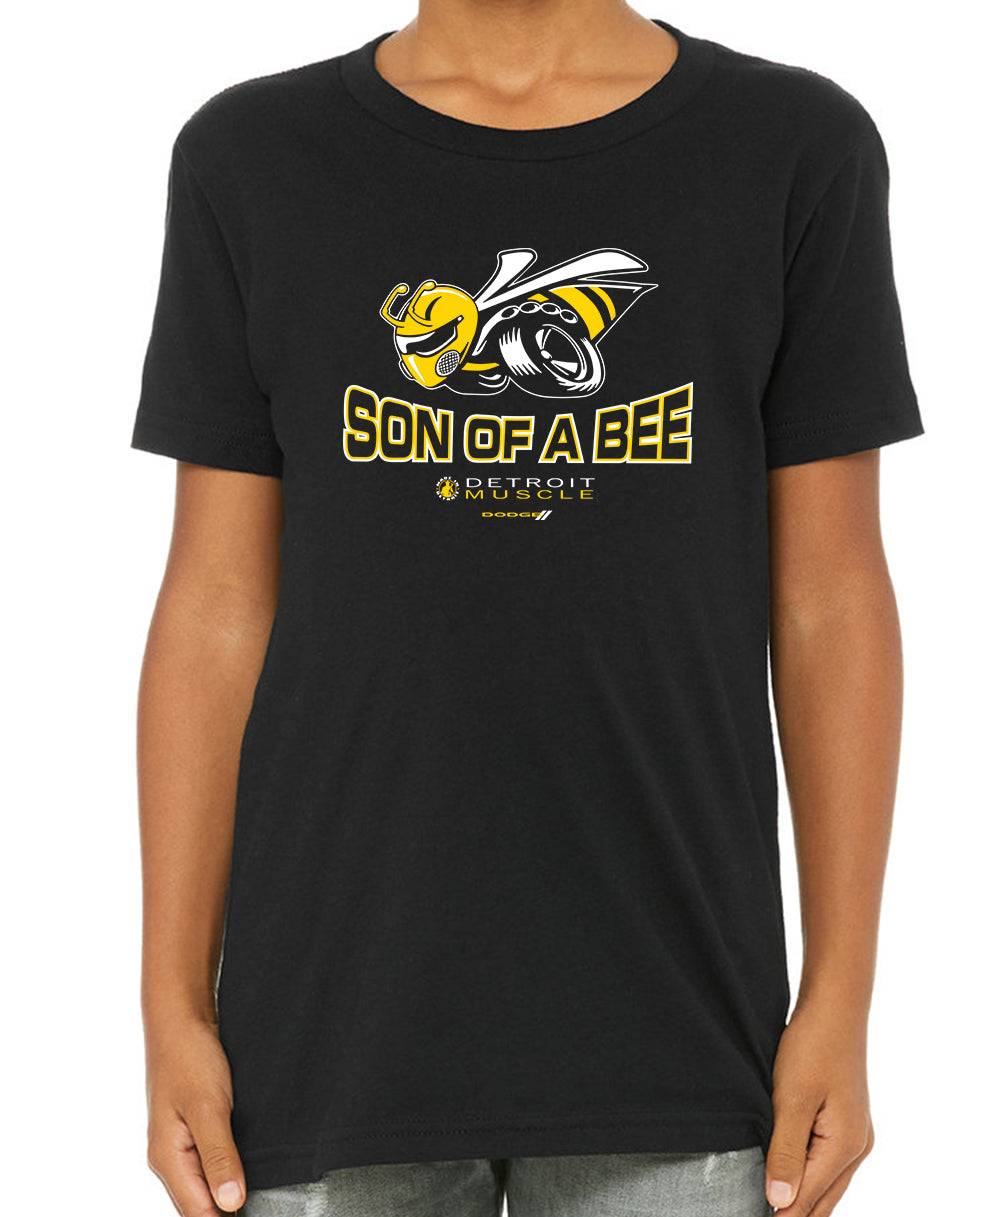 Dodge Son of a Bee - Youth Tee